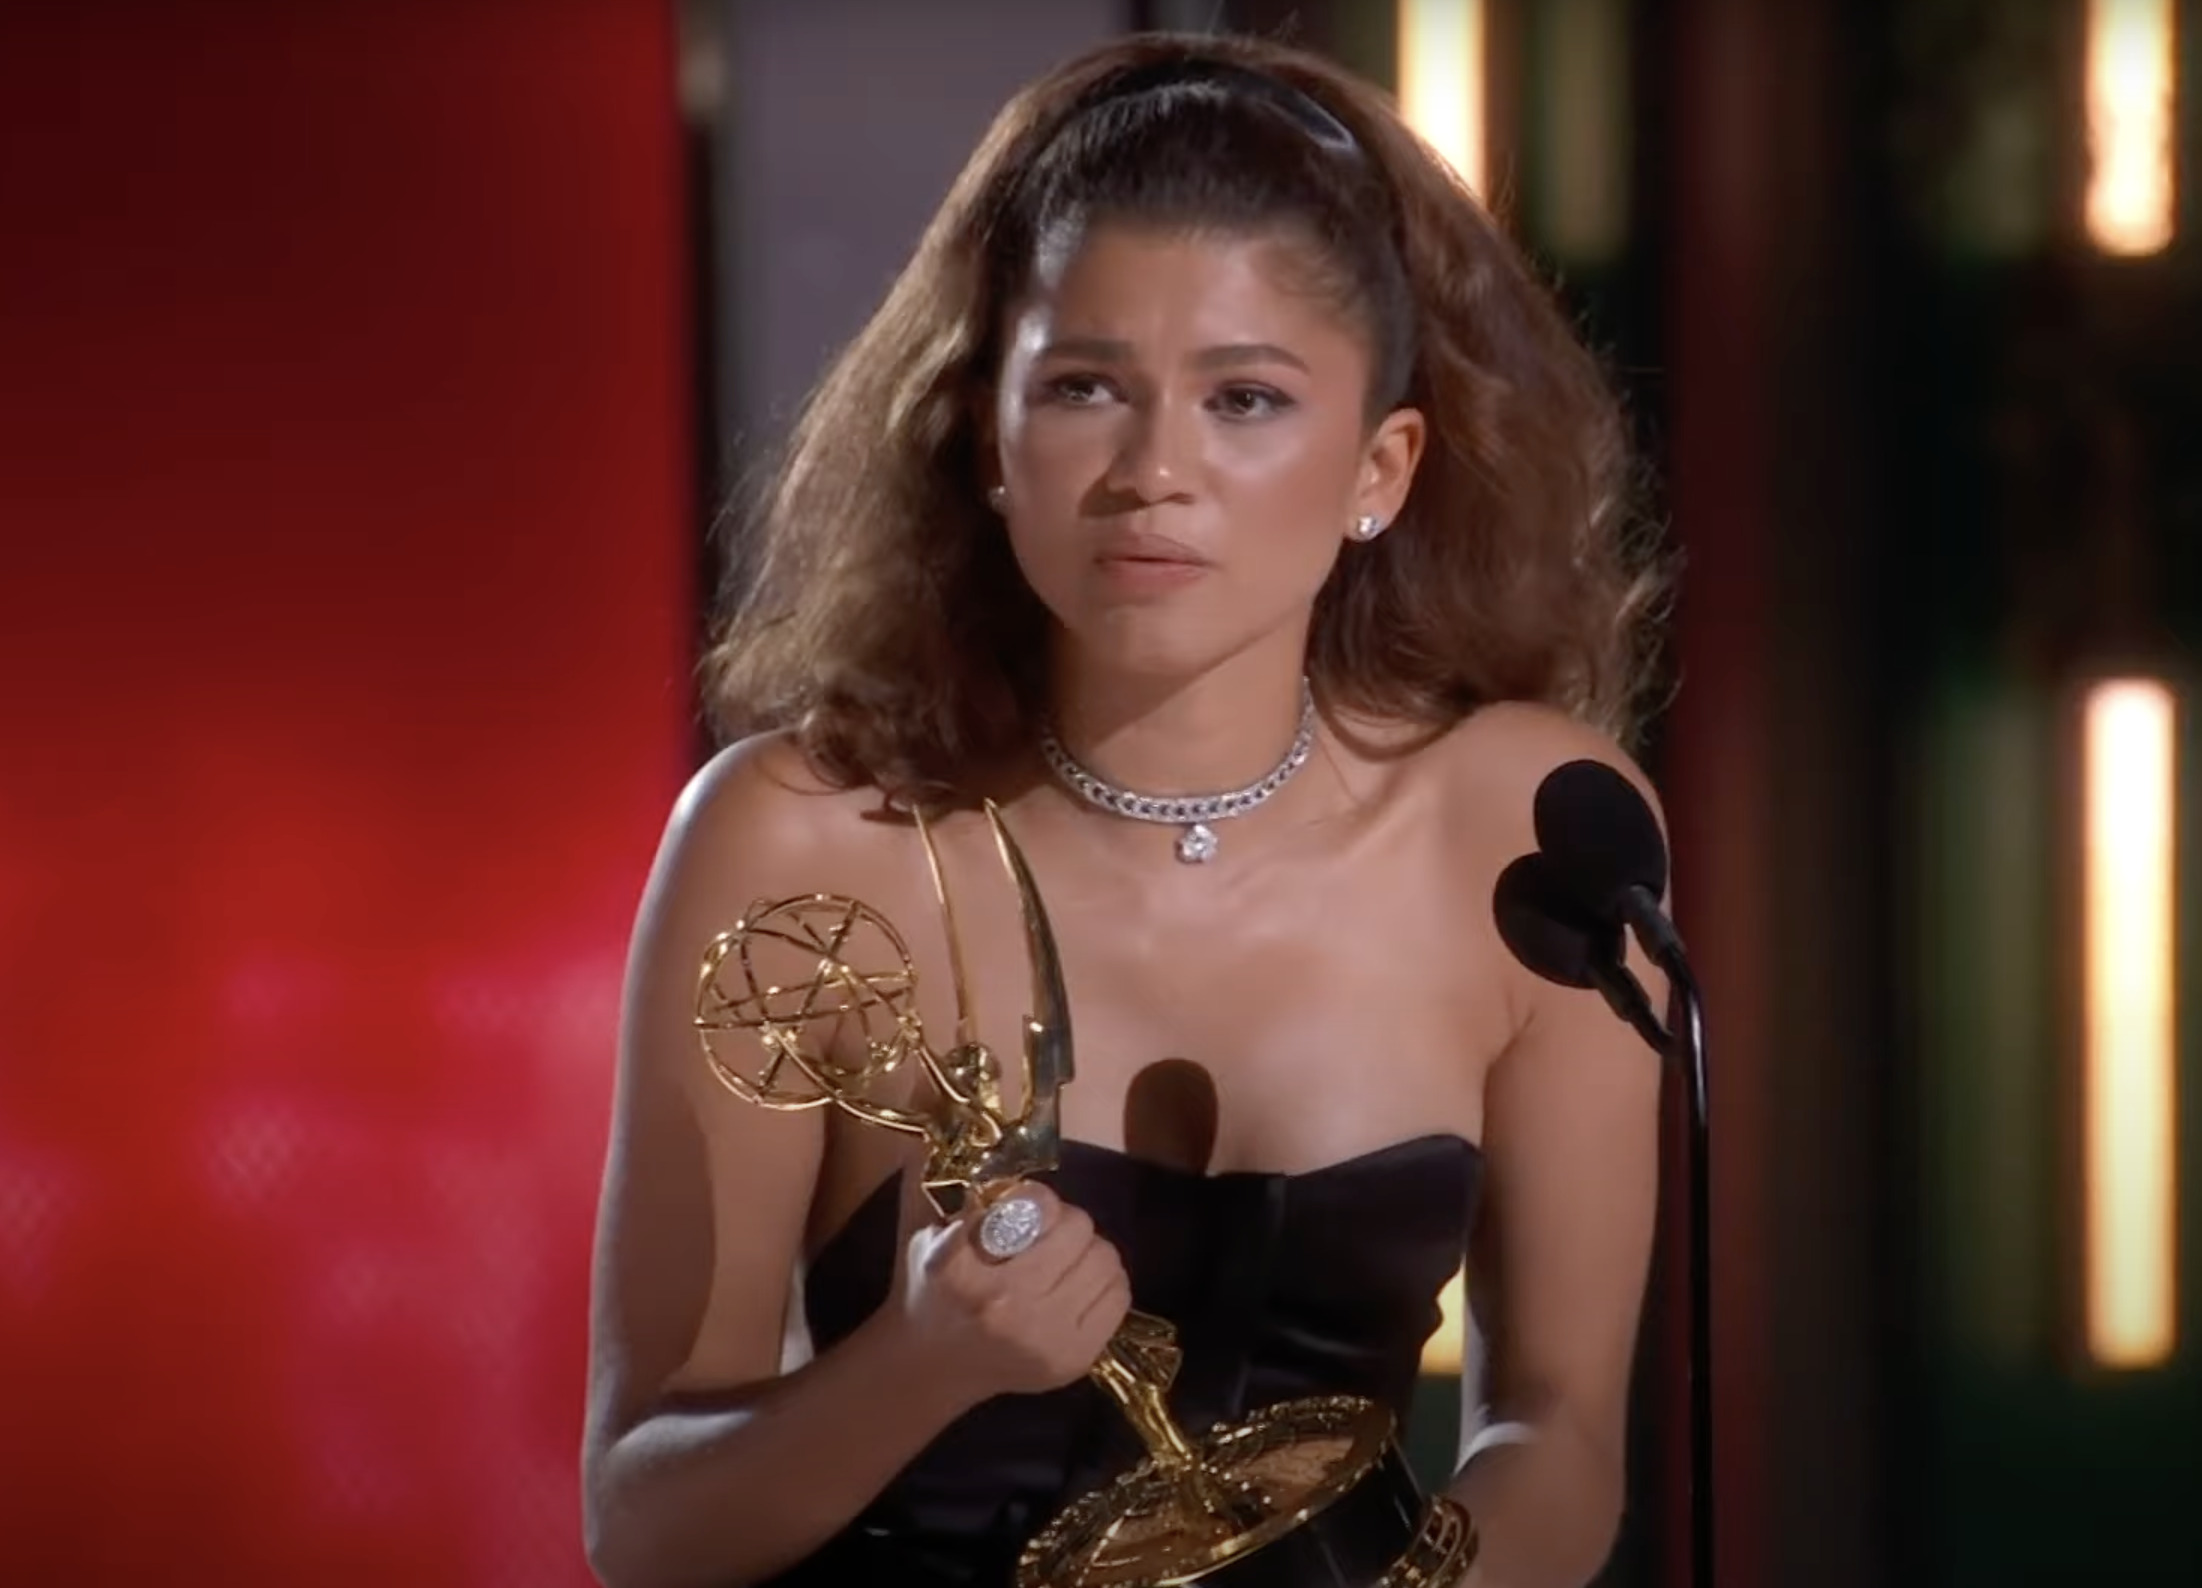 This 2nd Emmy Award for Zendaya Coleman represents a new record